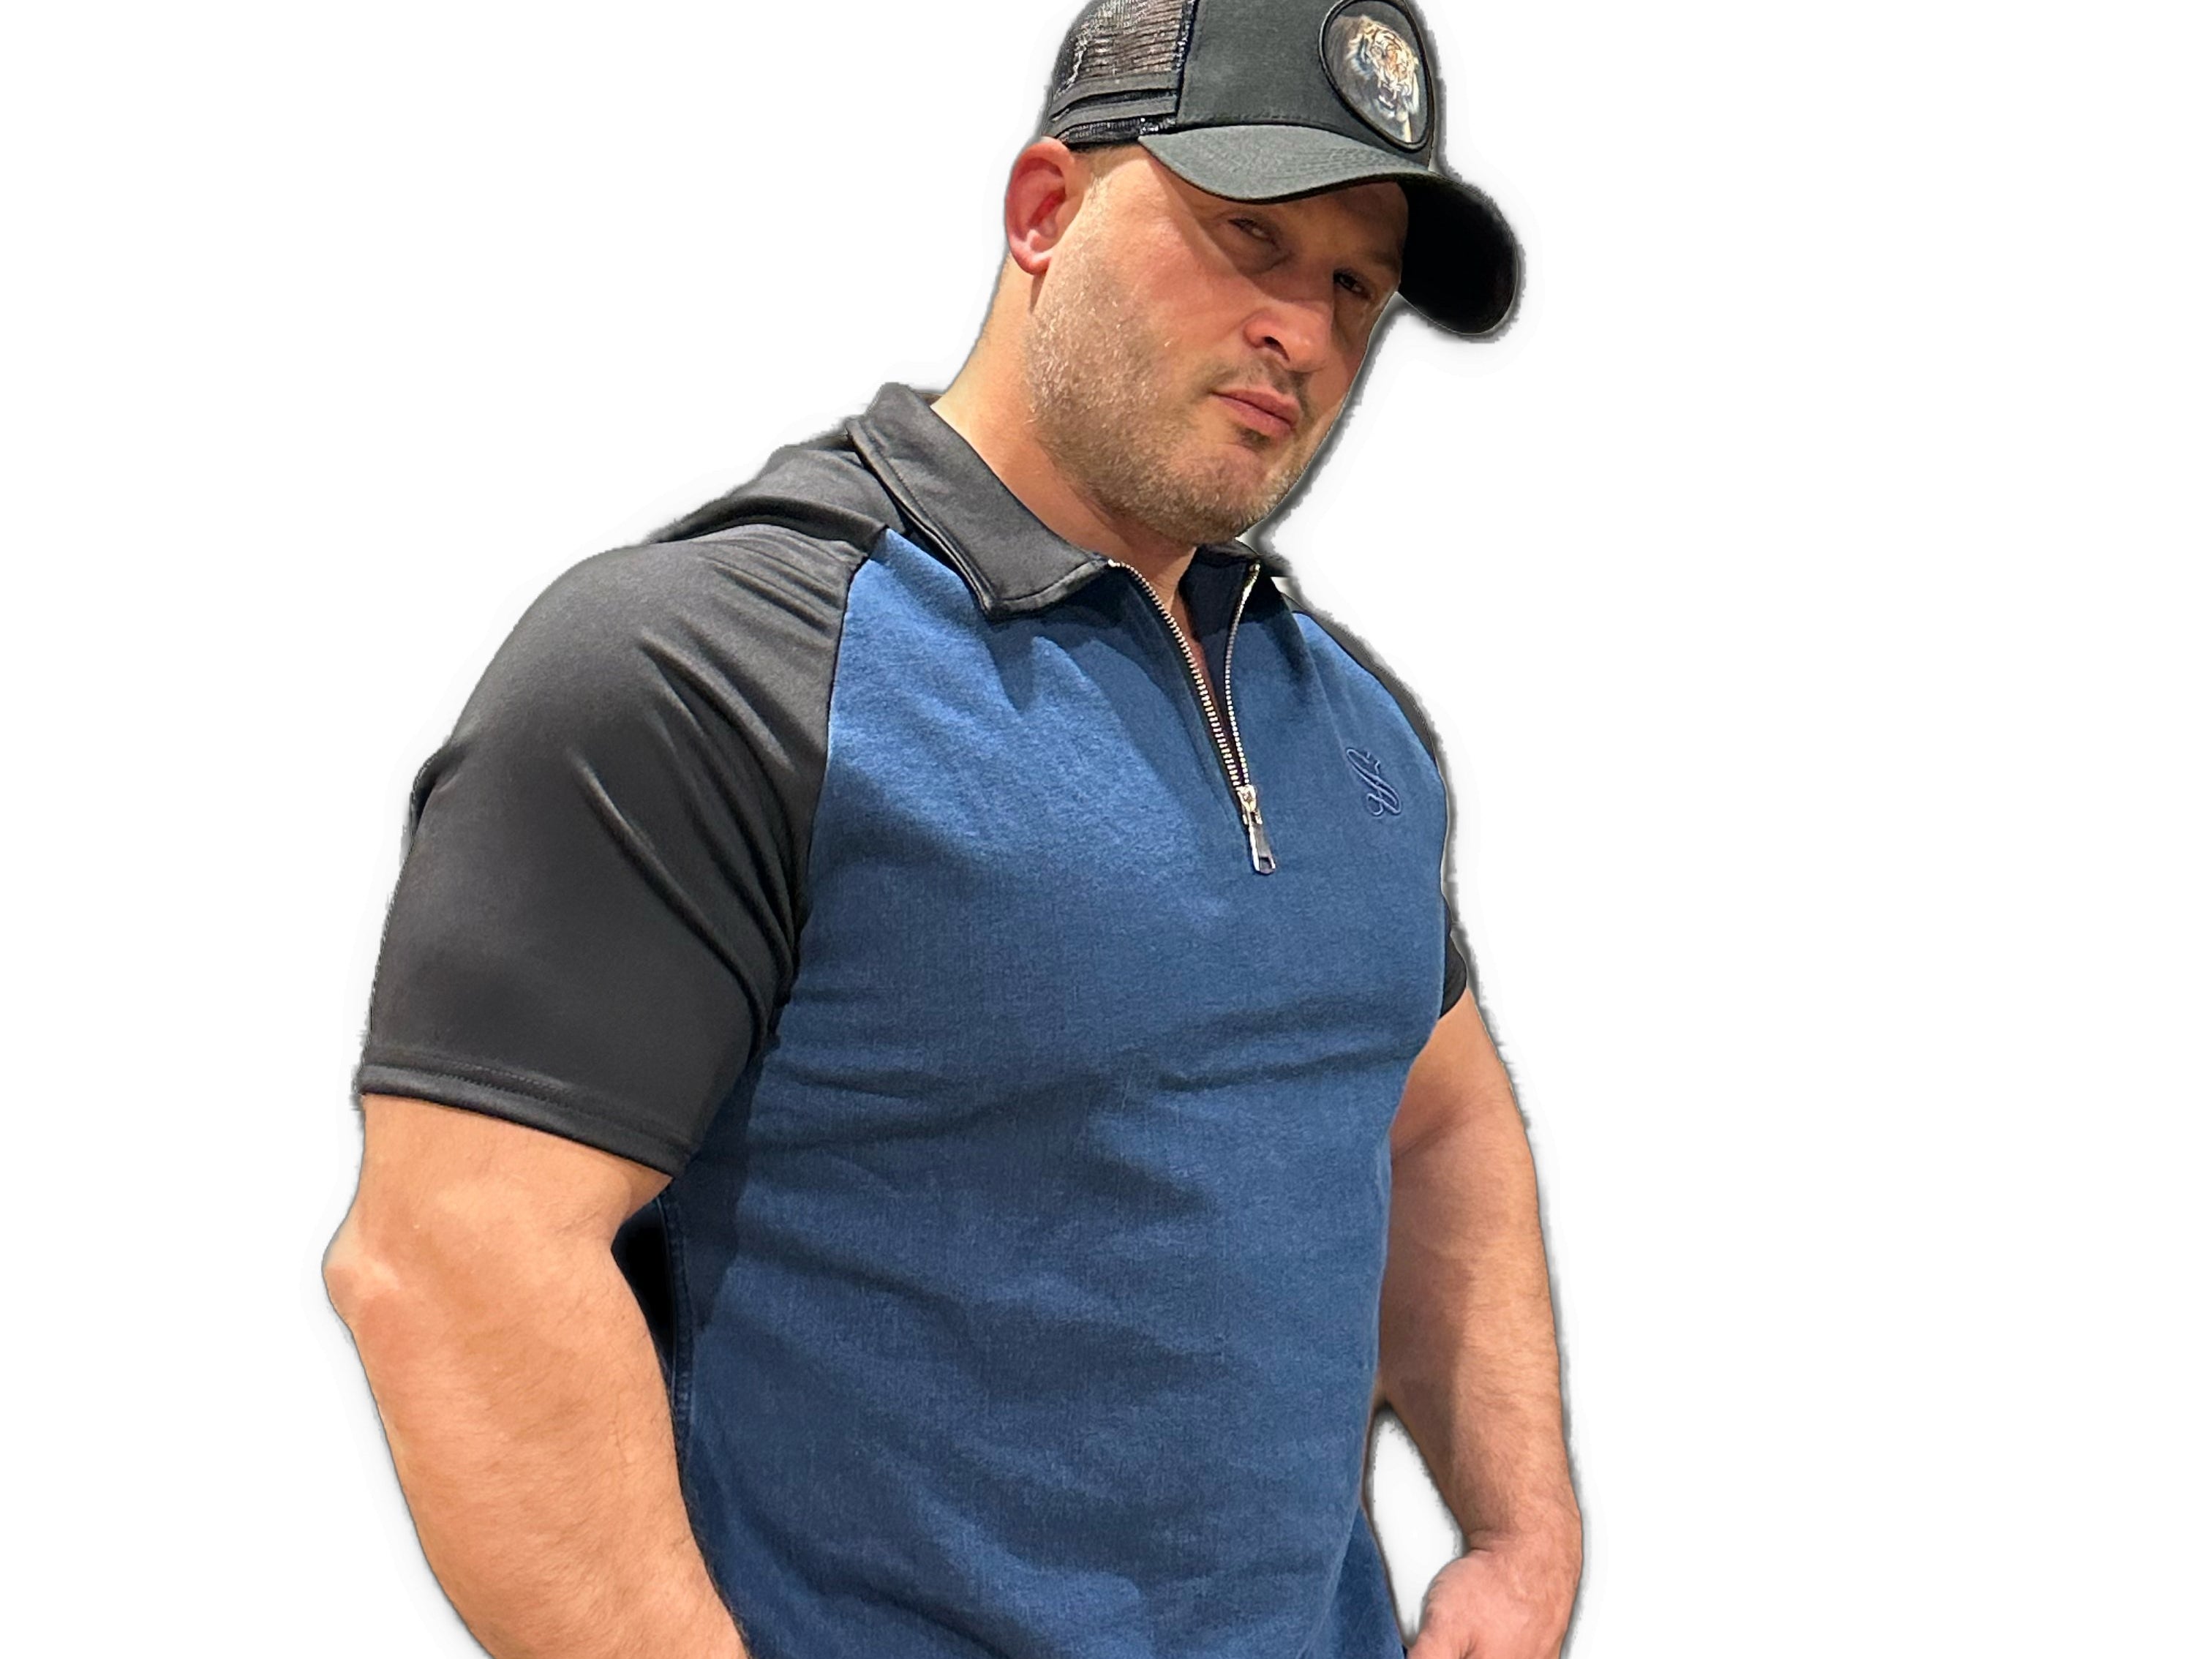 My X - Blue/Black Polo Jeans Shirt for Men - Sarman Fashion - Wholesale Clothing Fashion Brand for Men from Canada